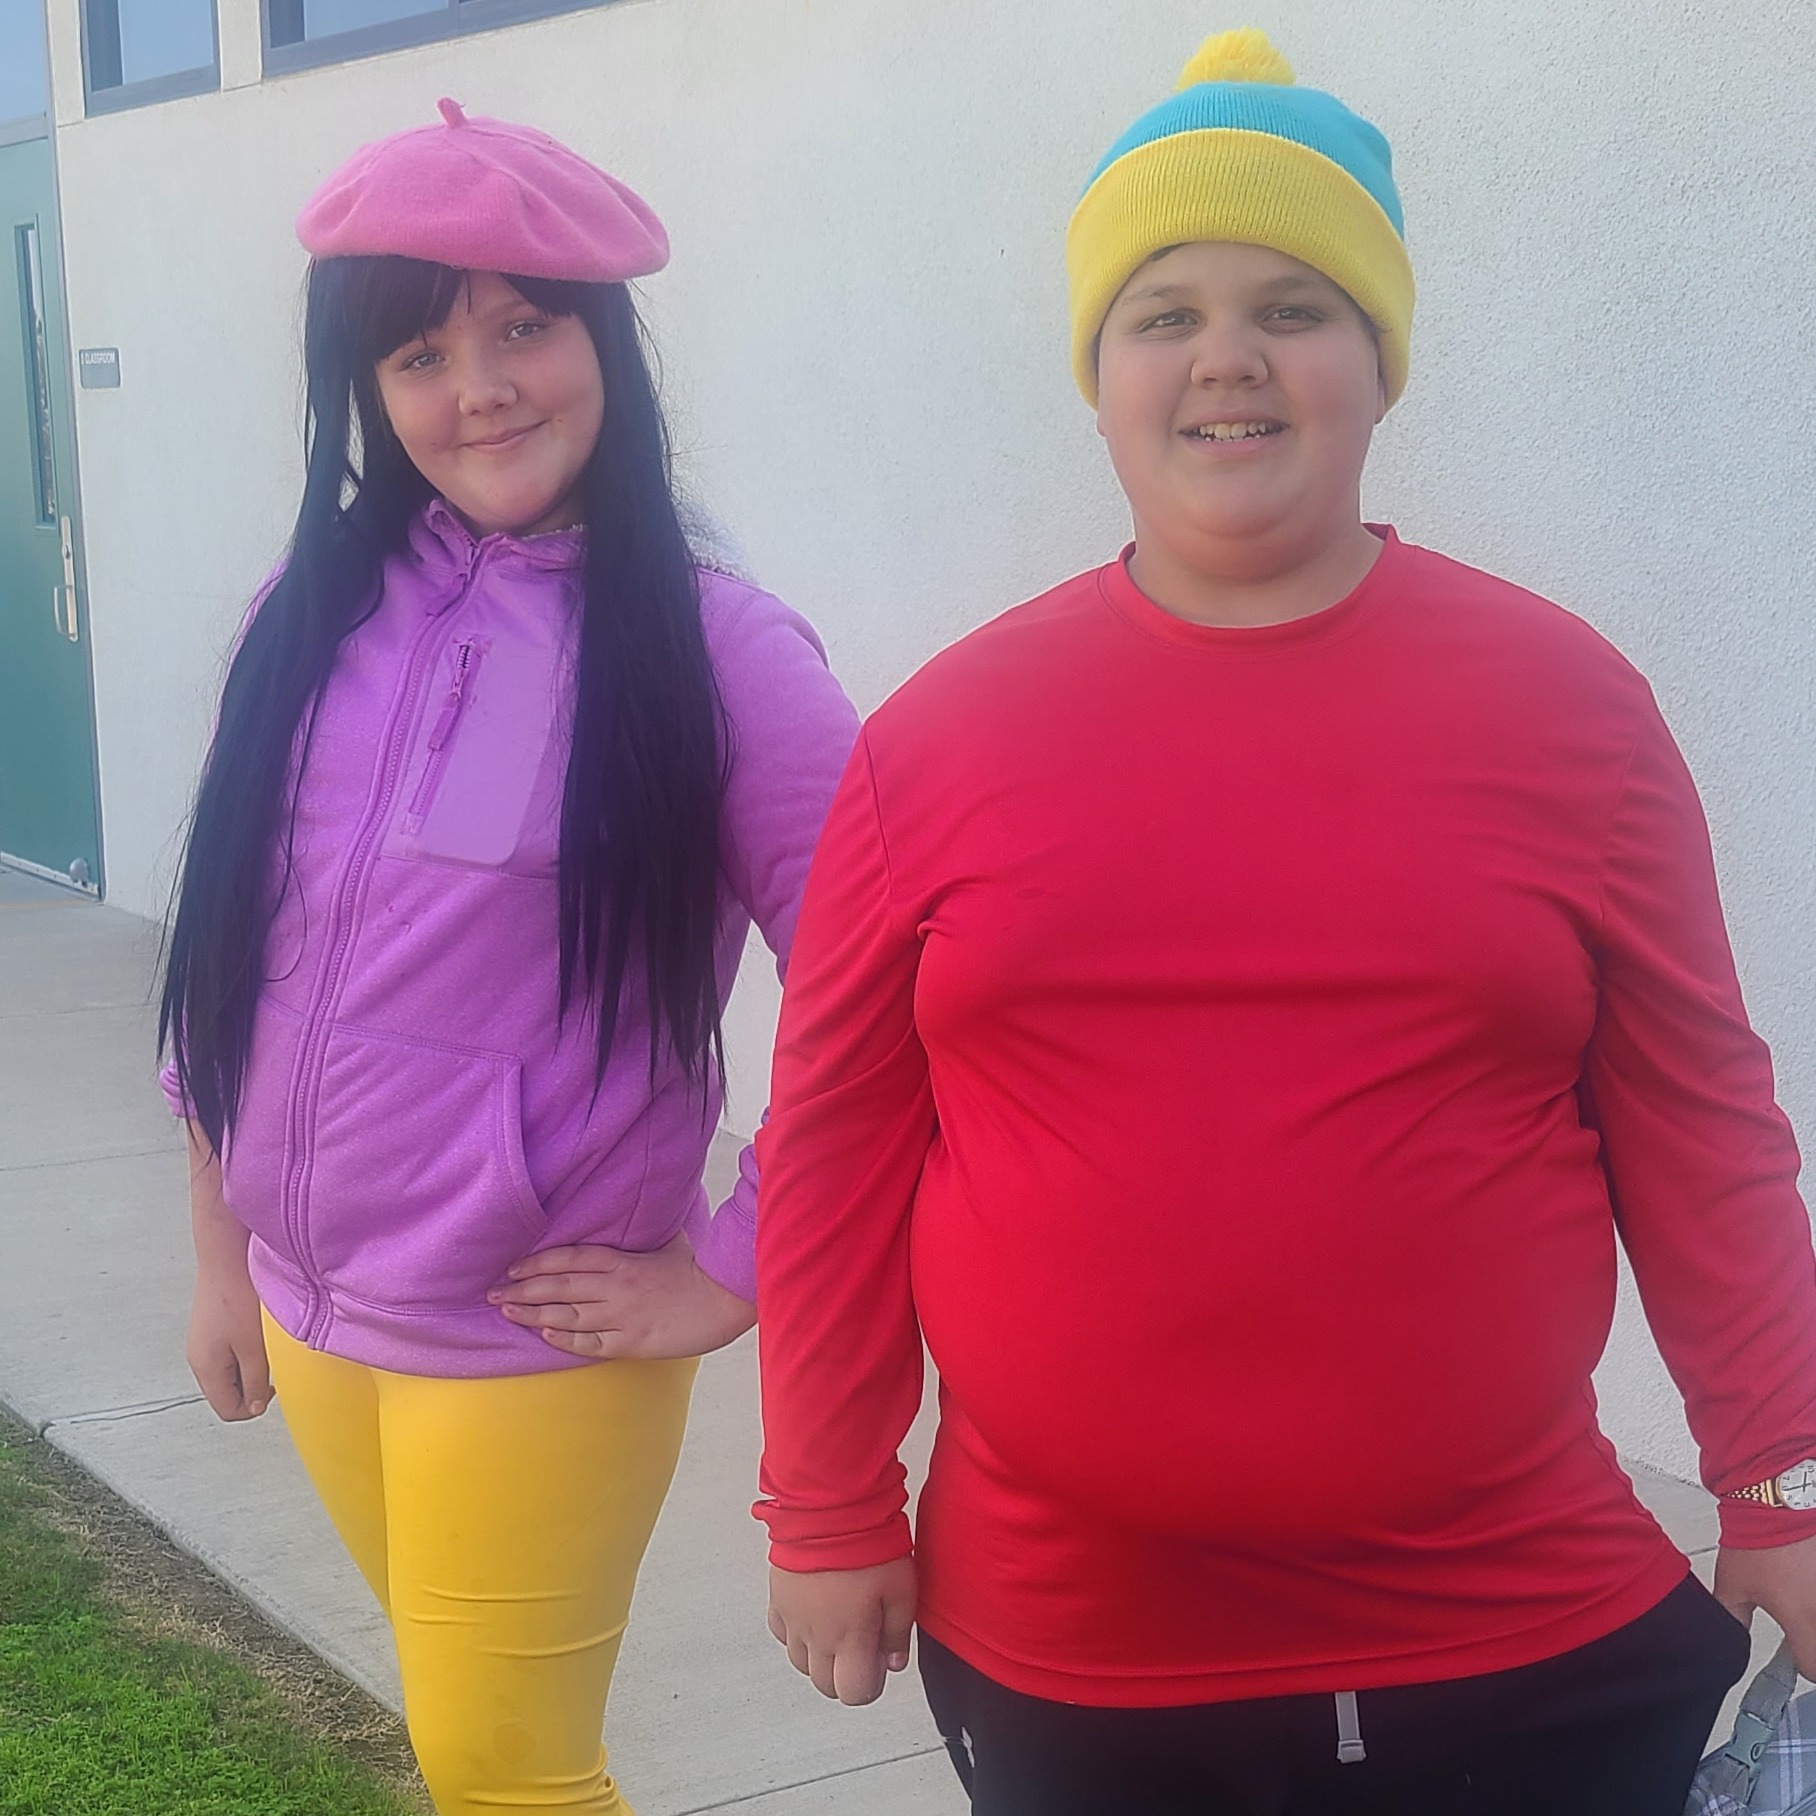 South Park costumes